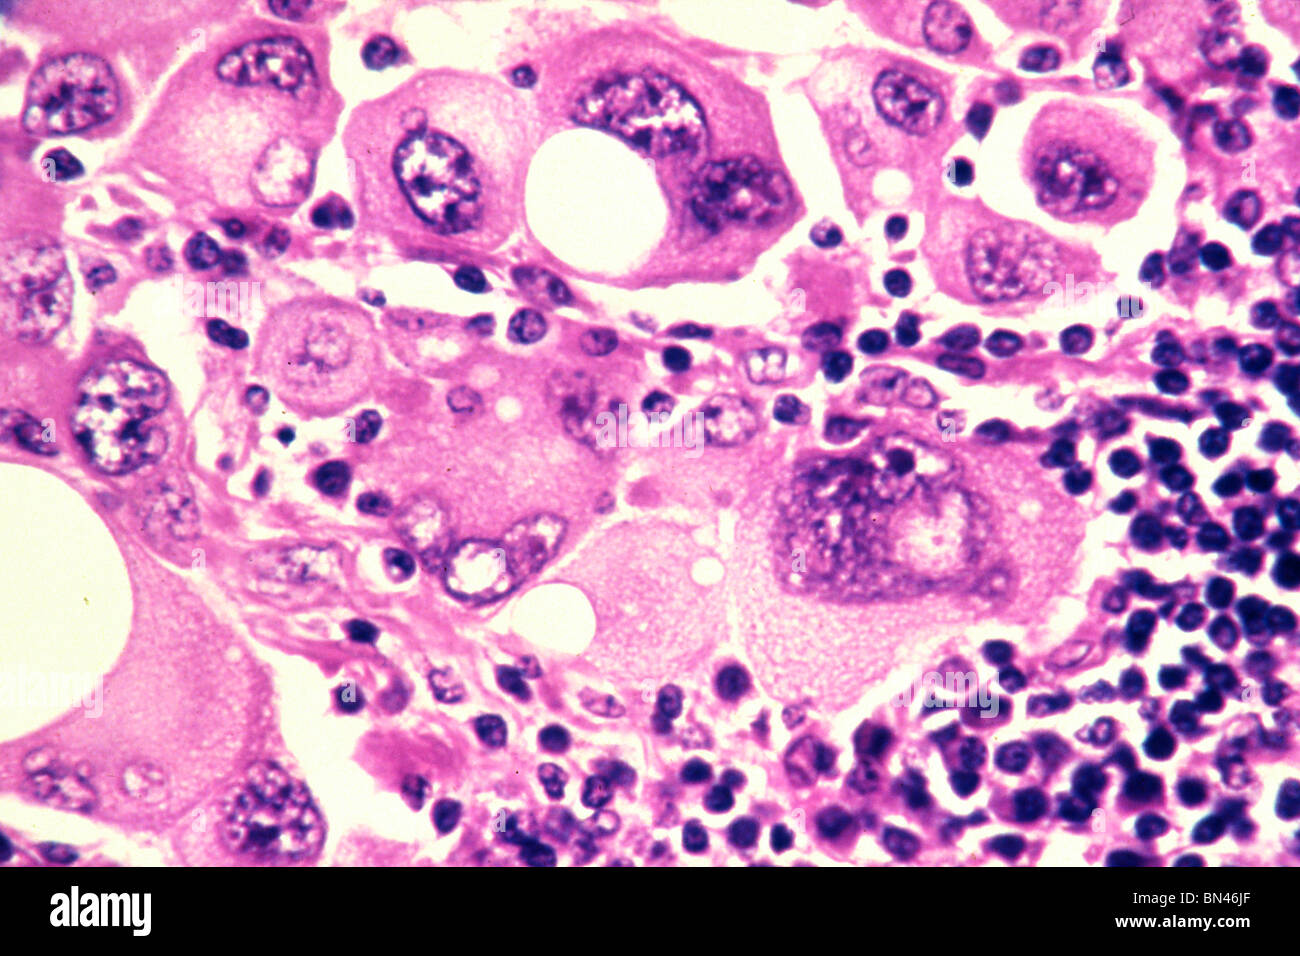 Human metastatic melanoma cells stained with an hematoxylin and eosin (H & E) stain and magnified to 320x Stock Photo